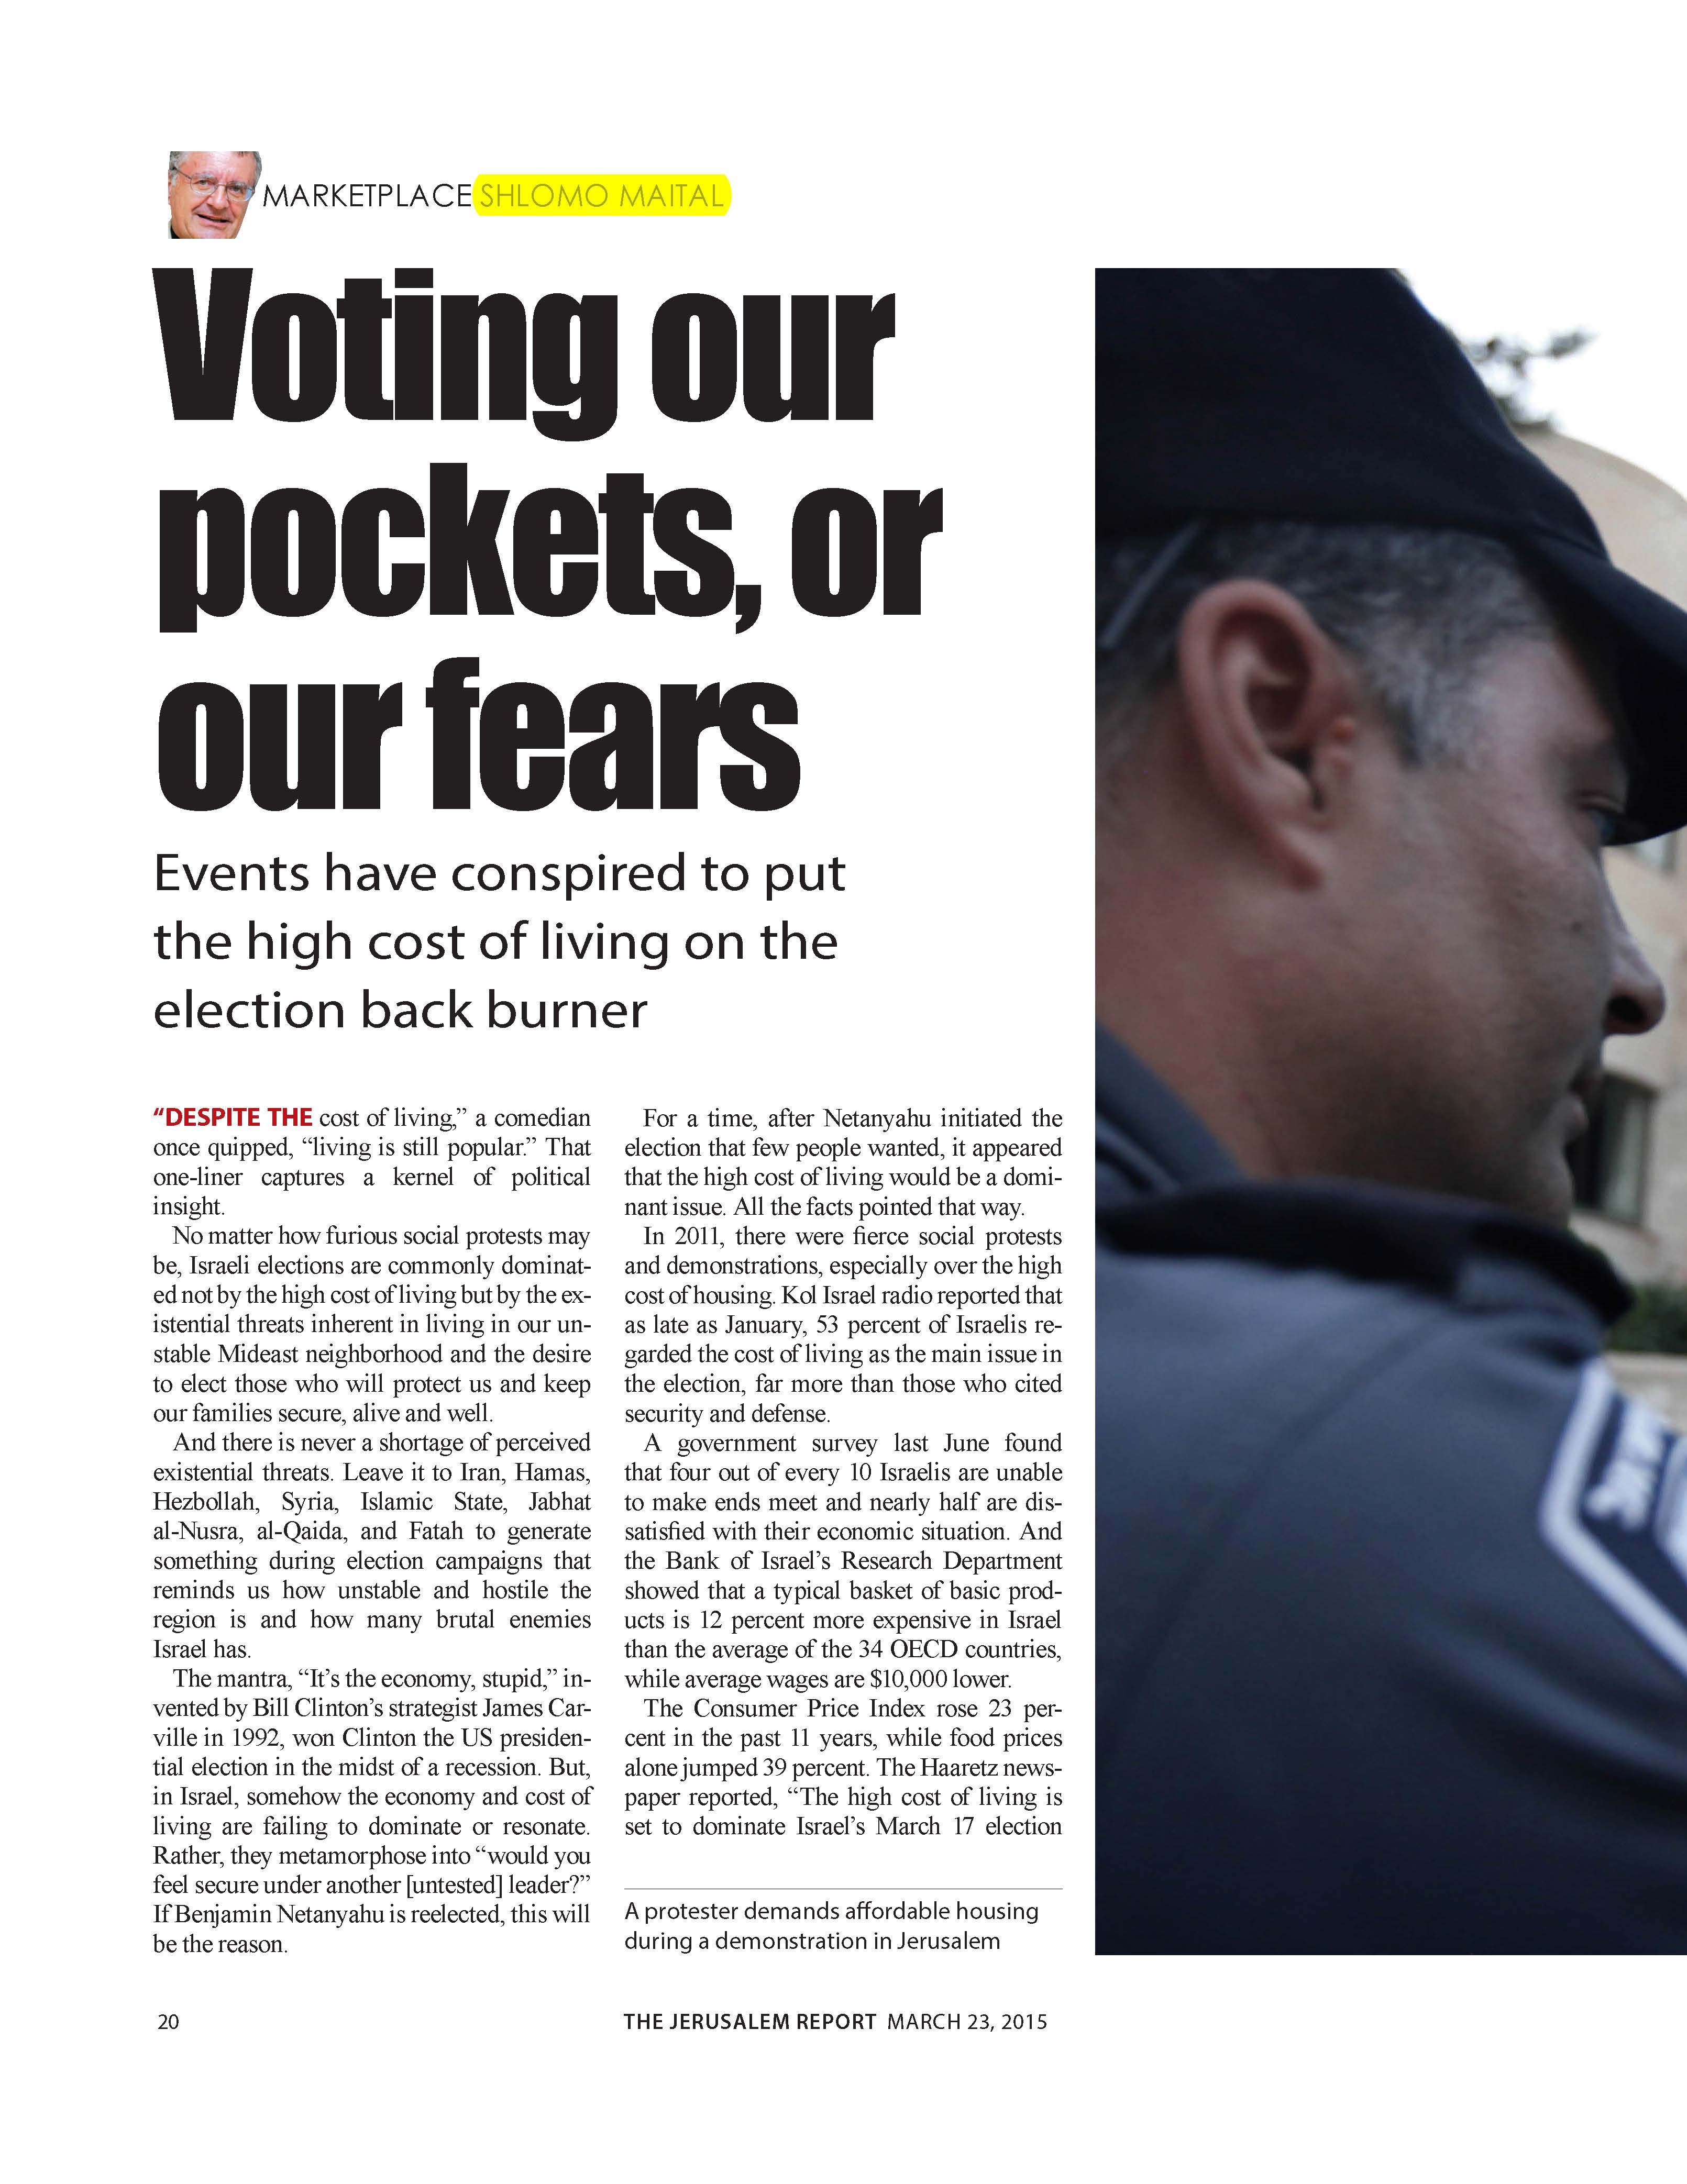 Voting our pockets, or our fears